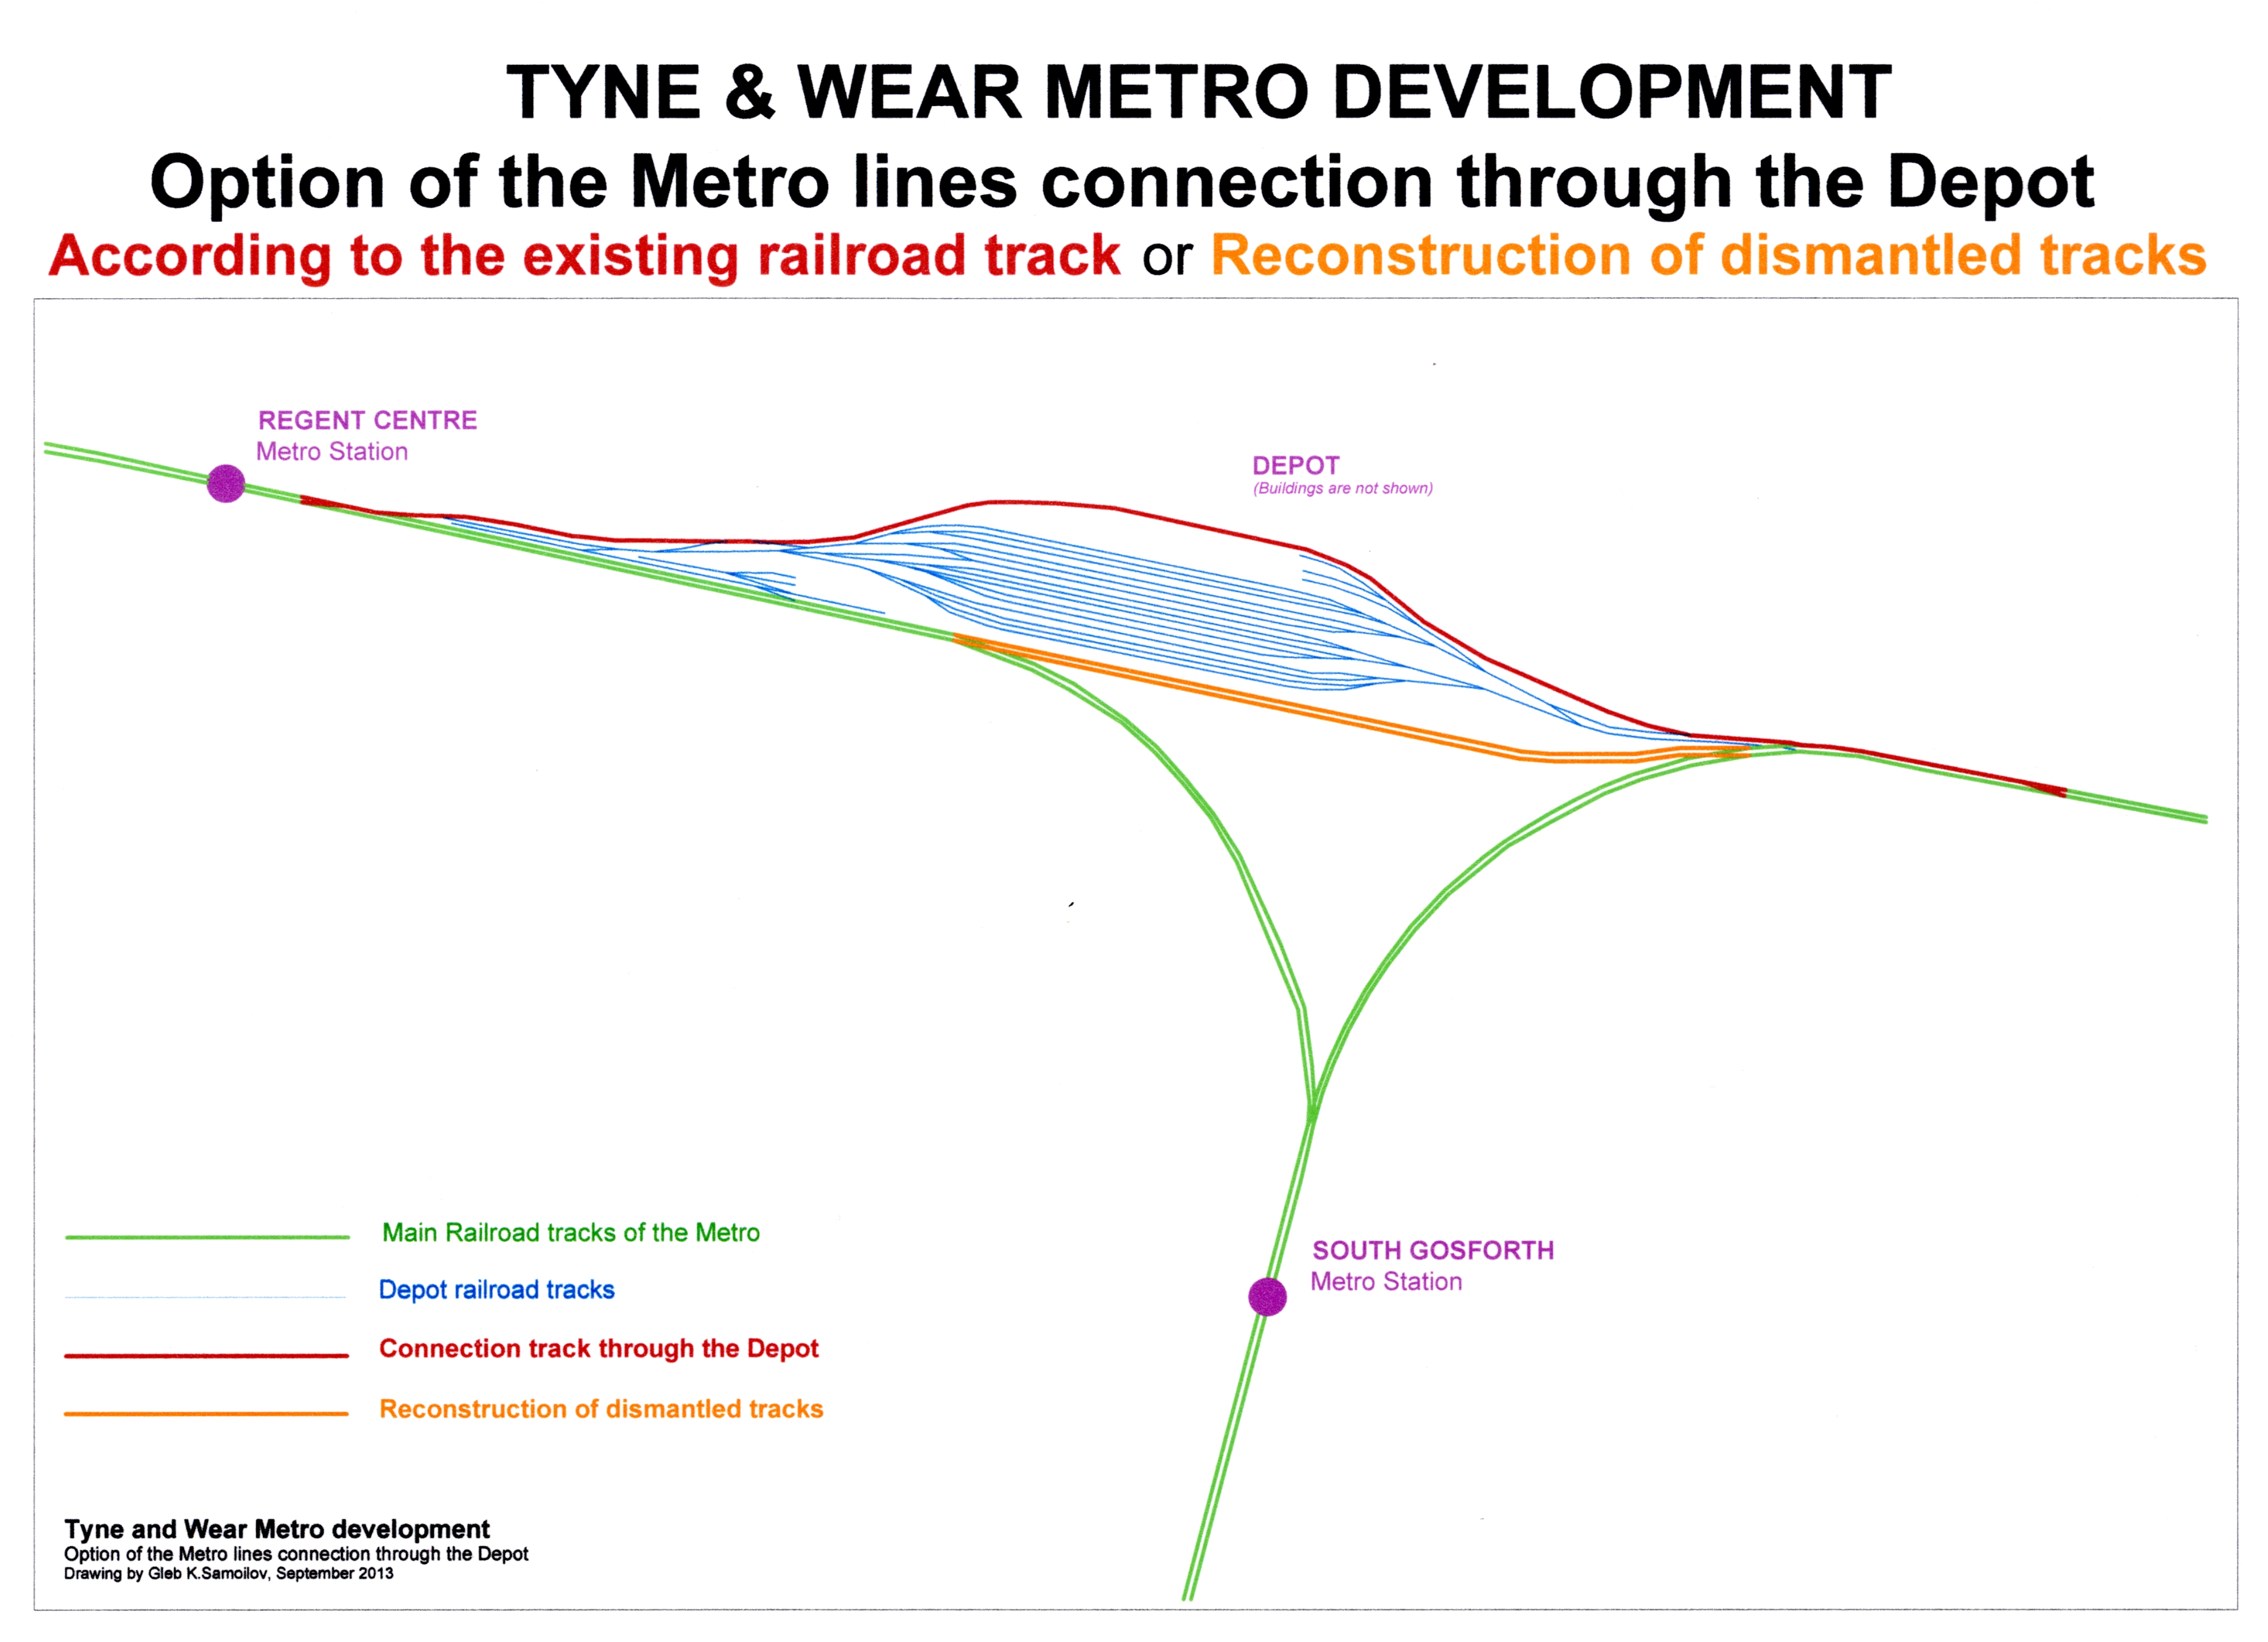 Option of the Tyne and Wear Metro lines connection through the Depot